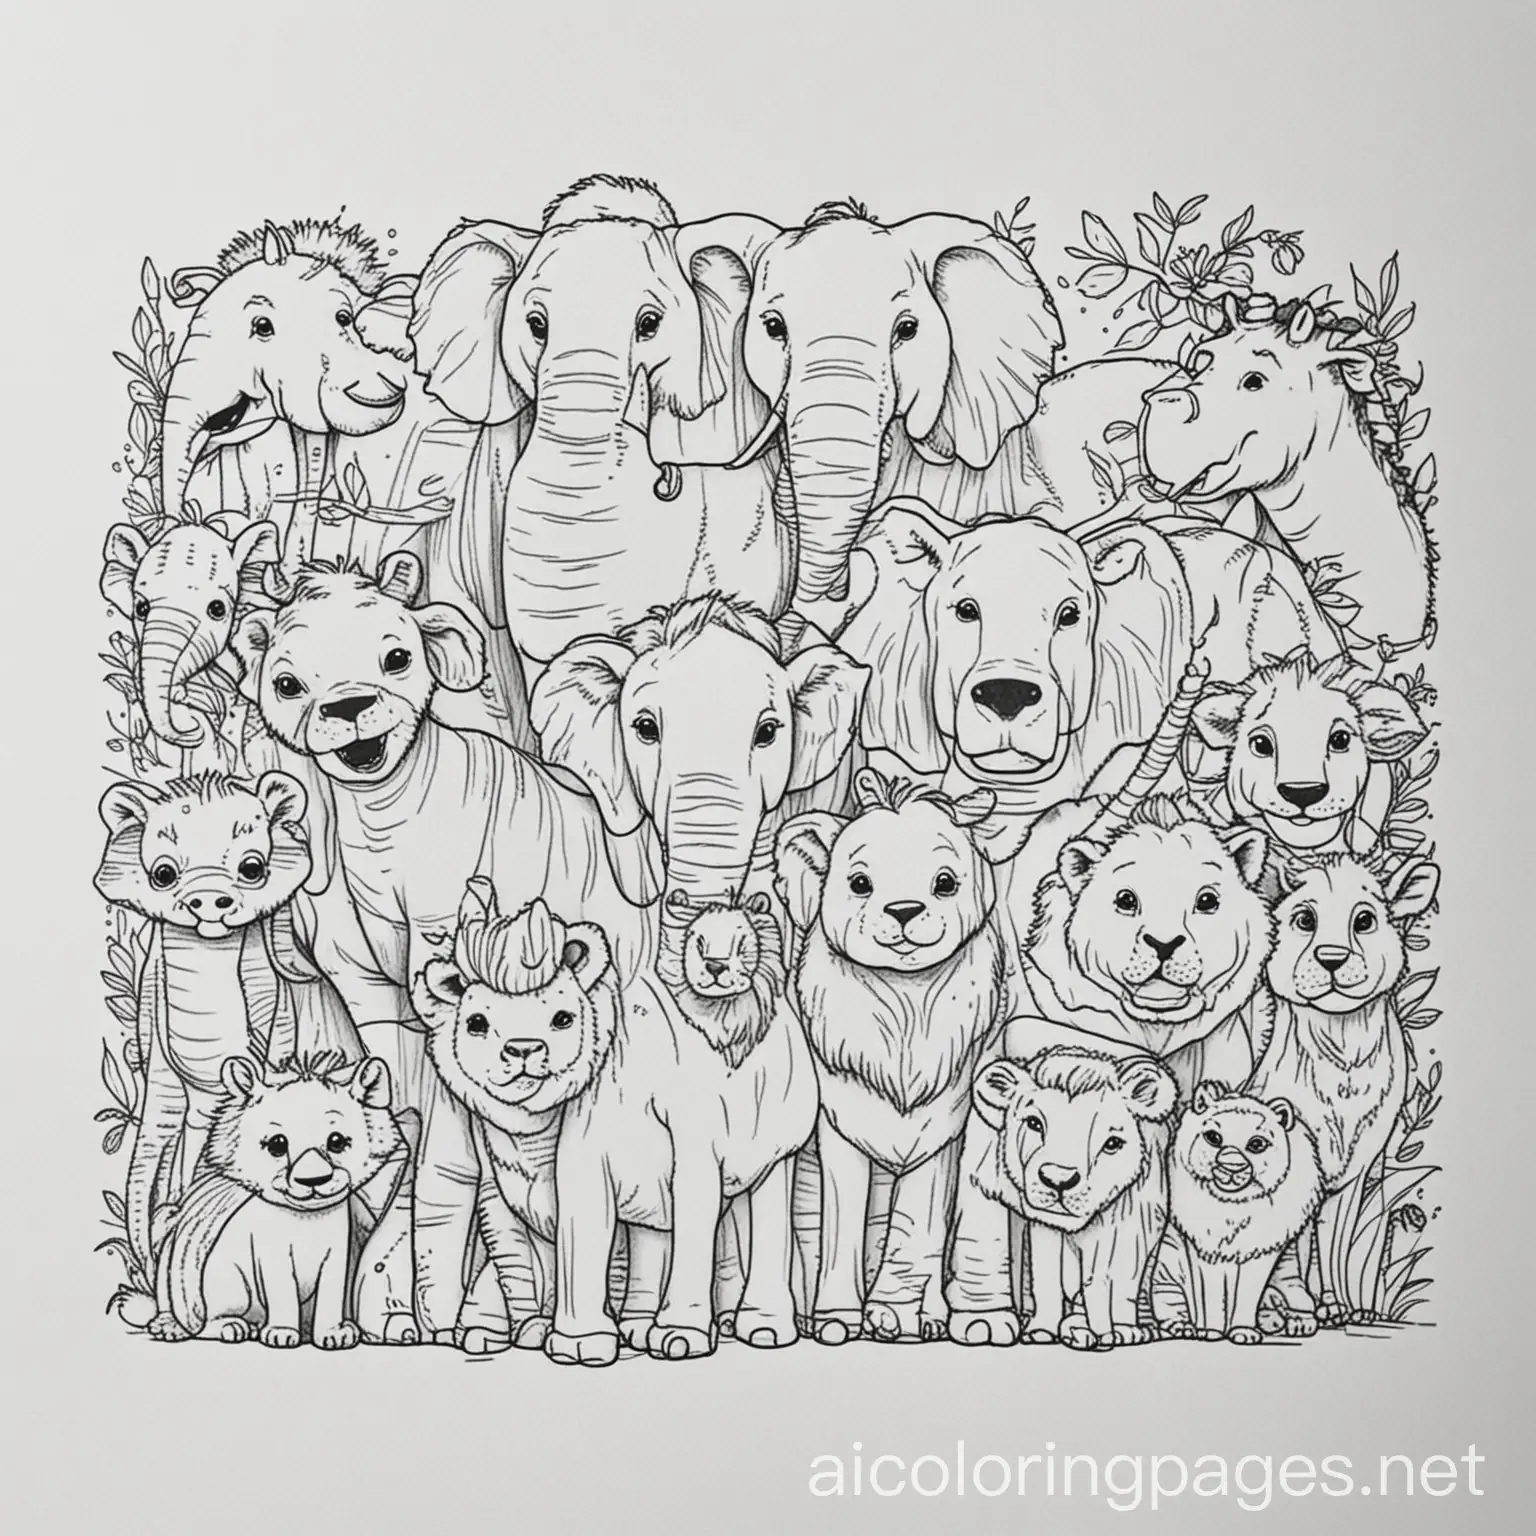 CUTE ZOO ANIMALS, Colouring Page, black and white, line art, white background, Simplicity, Ample White Space. The background of the colouring page is plain white to make it easy for young children to colour within the lines. The outlines of all the subjects are easy to distinguish, making it simple for kids to colour without too much difficulty ,, Coloring Page, black and white, line art, white background, Simplicity, Ample White Space. The background of the coloring page is plain white to make it easy for young children to color within the lines. The outlines of all the subjects are easy to distinguish, making it simple for kids to color without too much difficulty